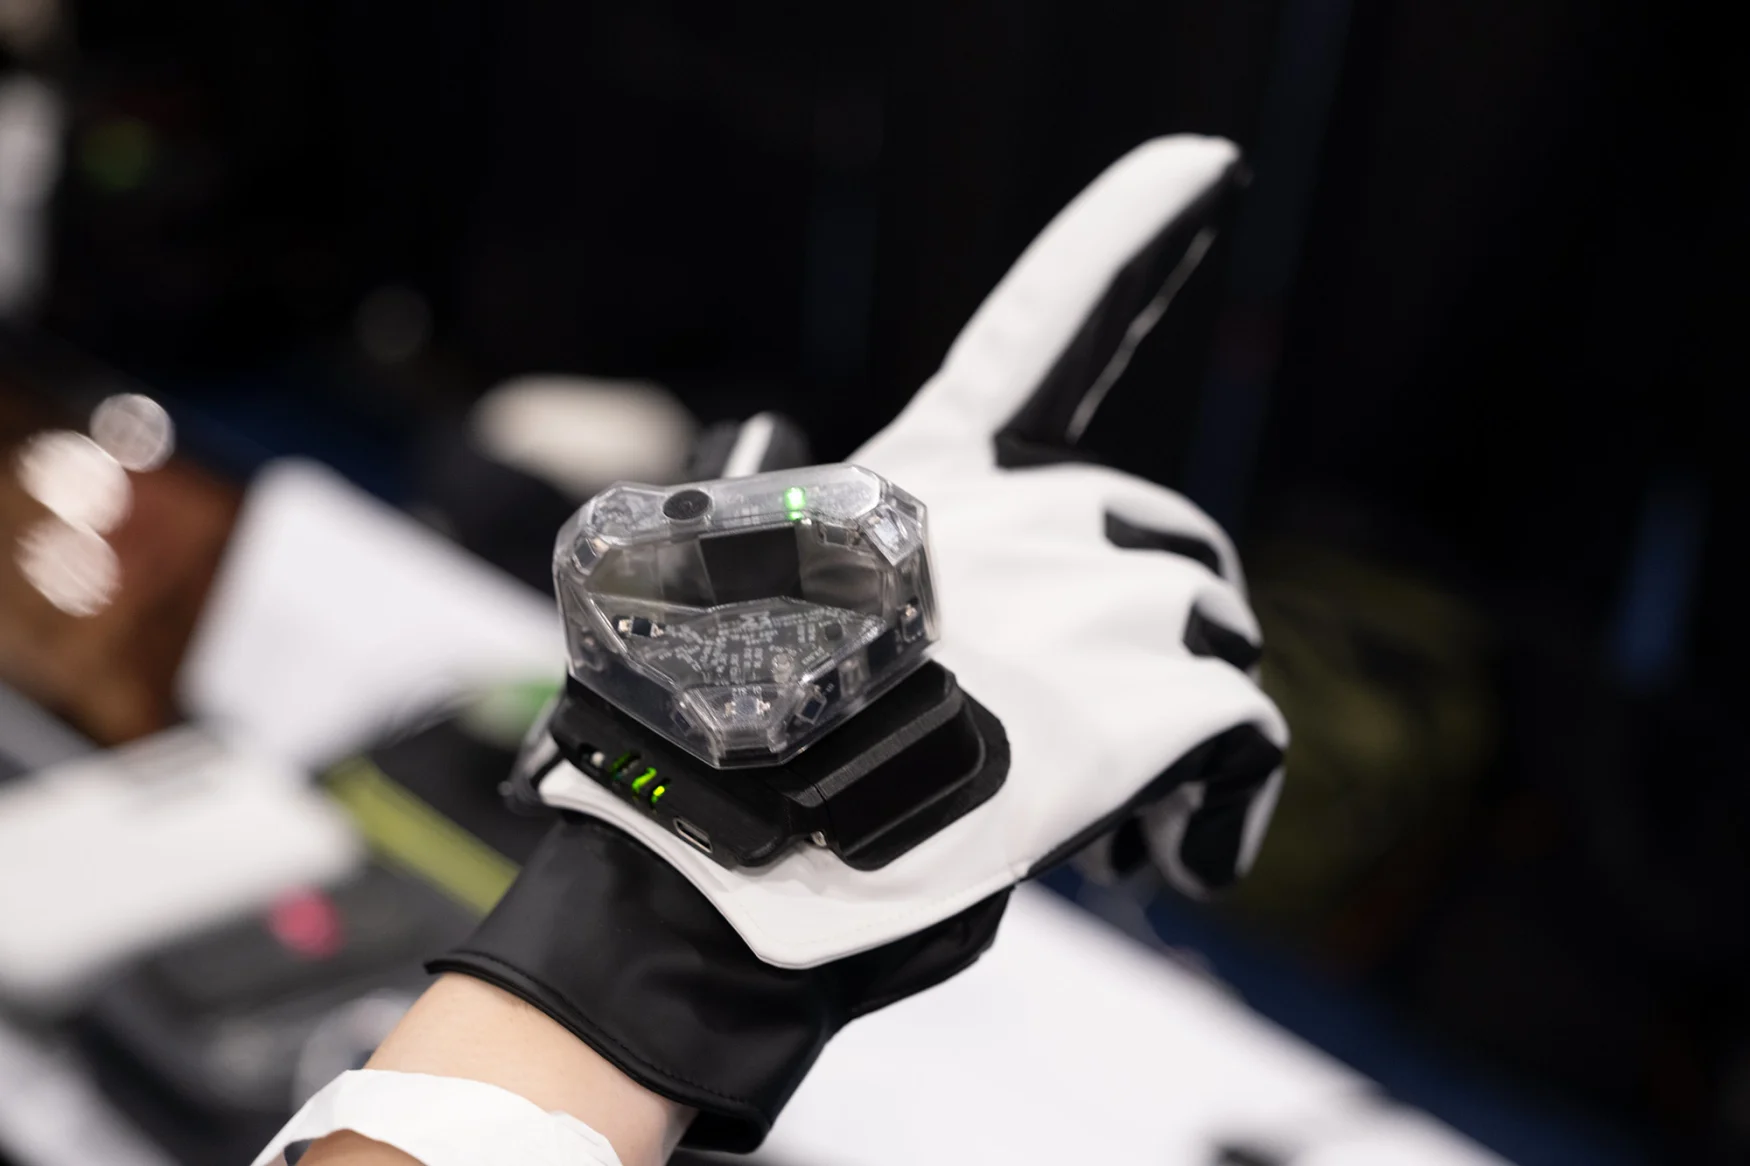 A VR glove is shown with a haptic sensor on top.